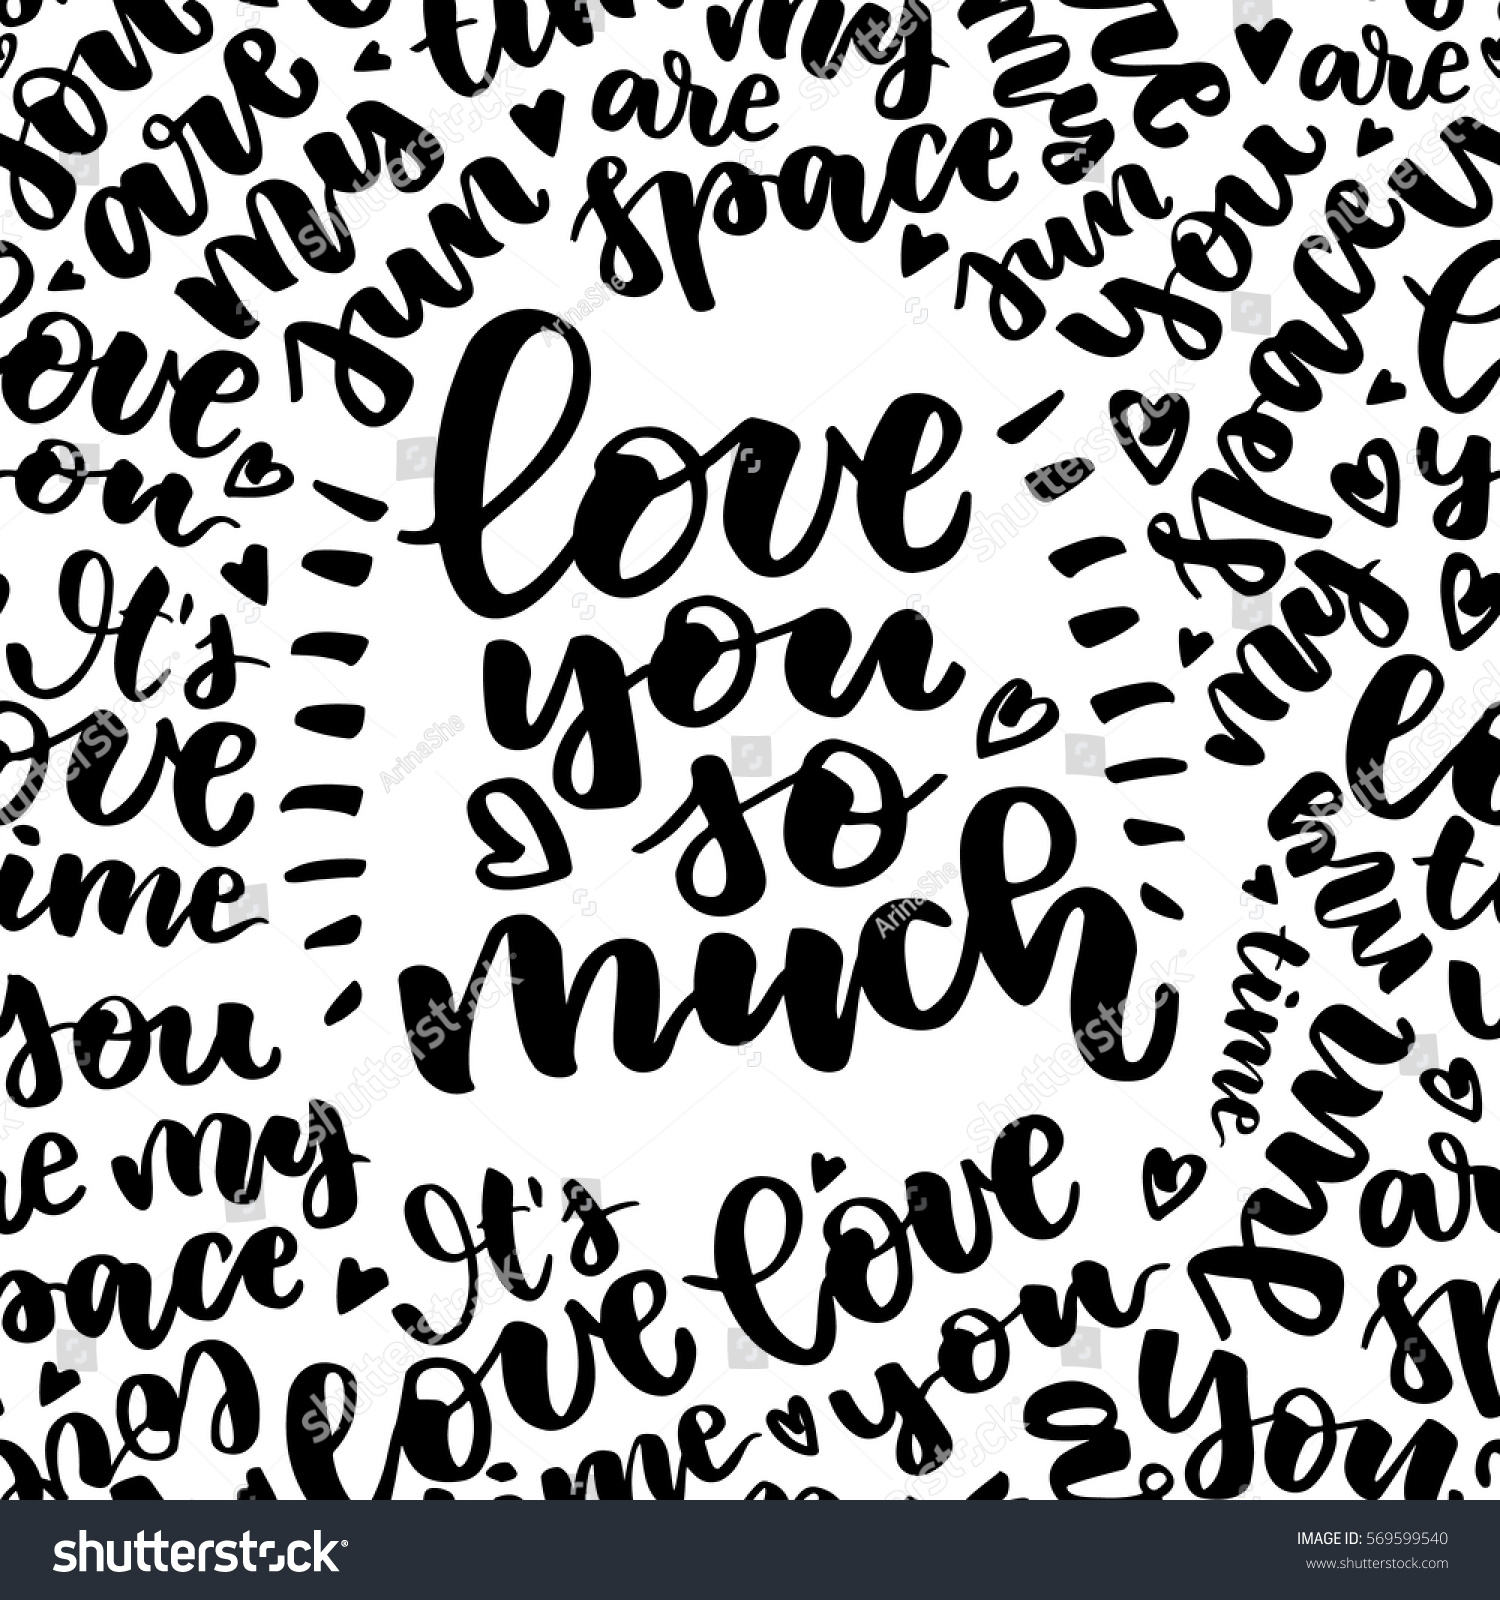 Love you so much Beautiful quote written by hand with a brush Festive inscription